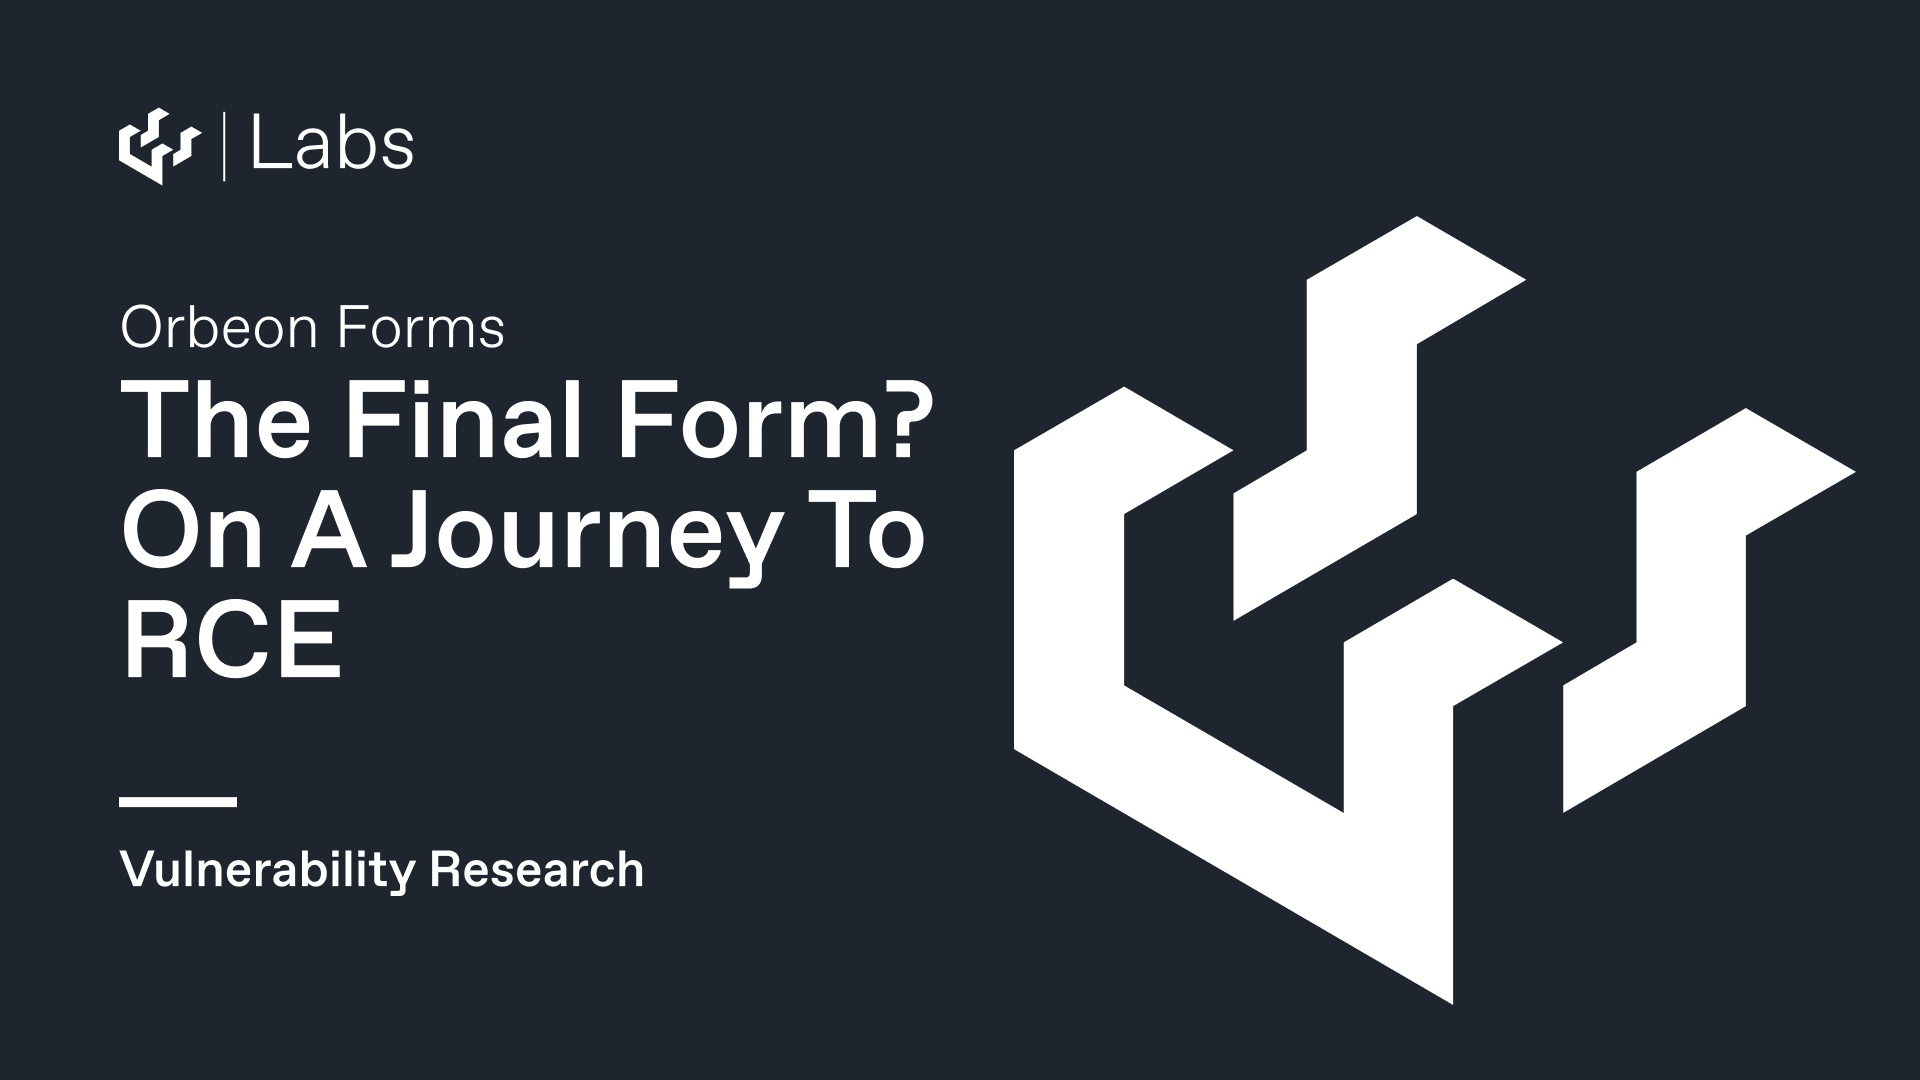 Orbeon Forms: The Final Form? On A Journey To RCE